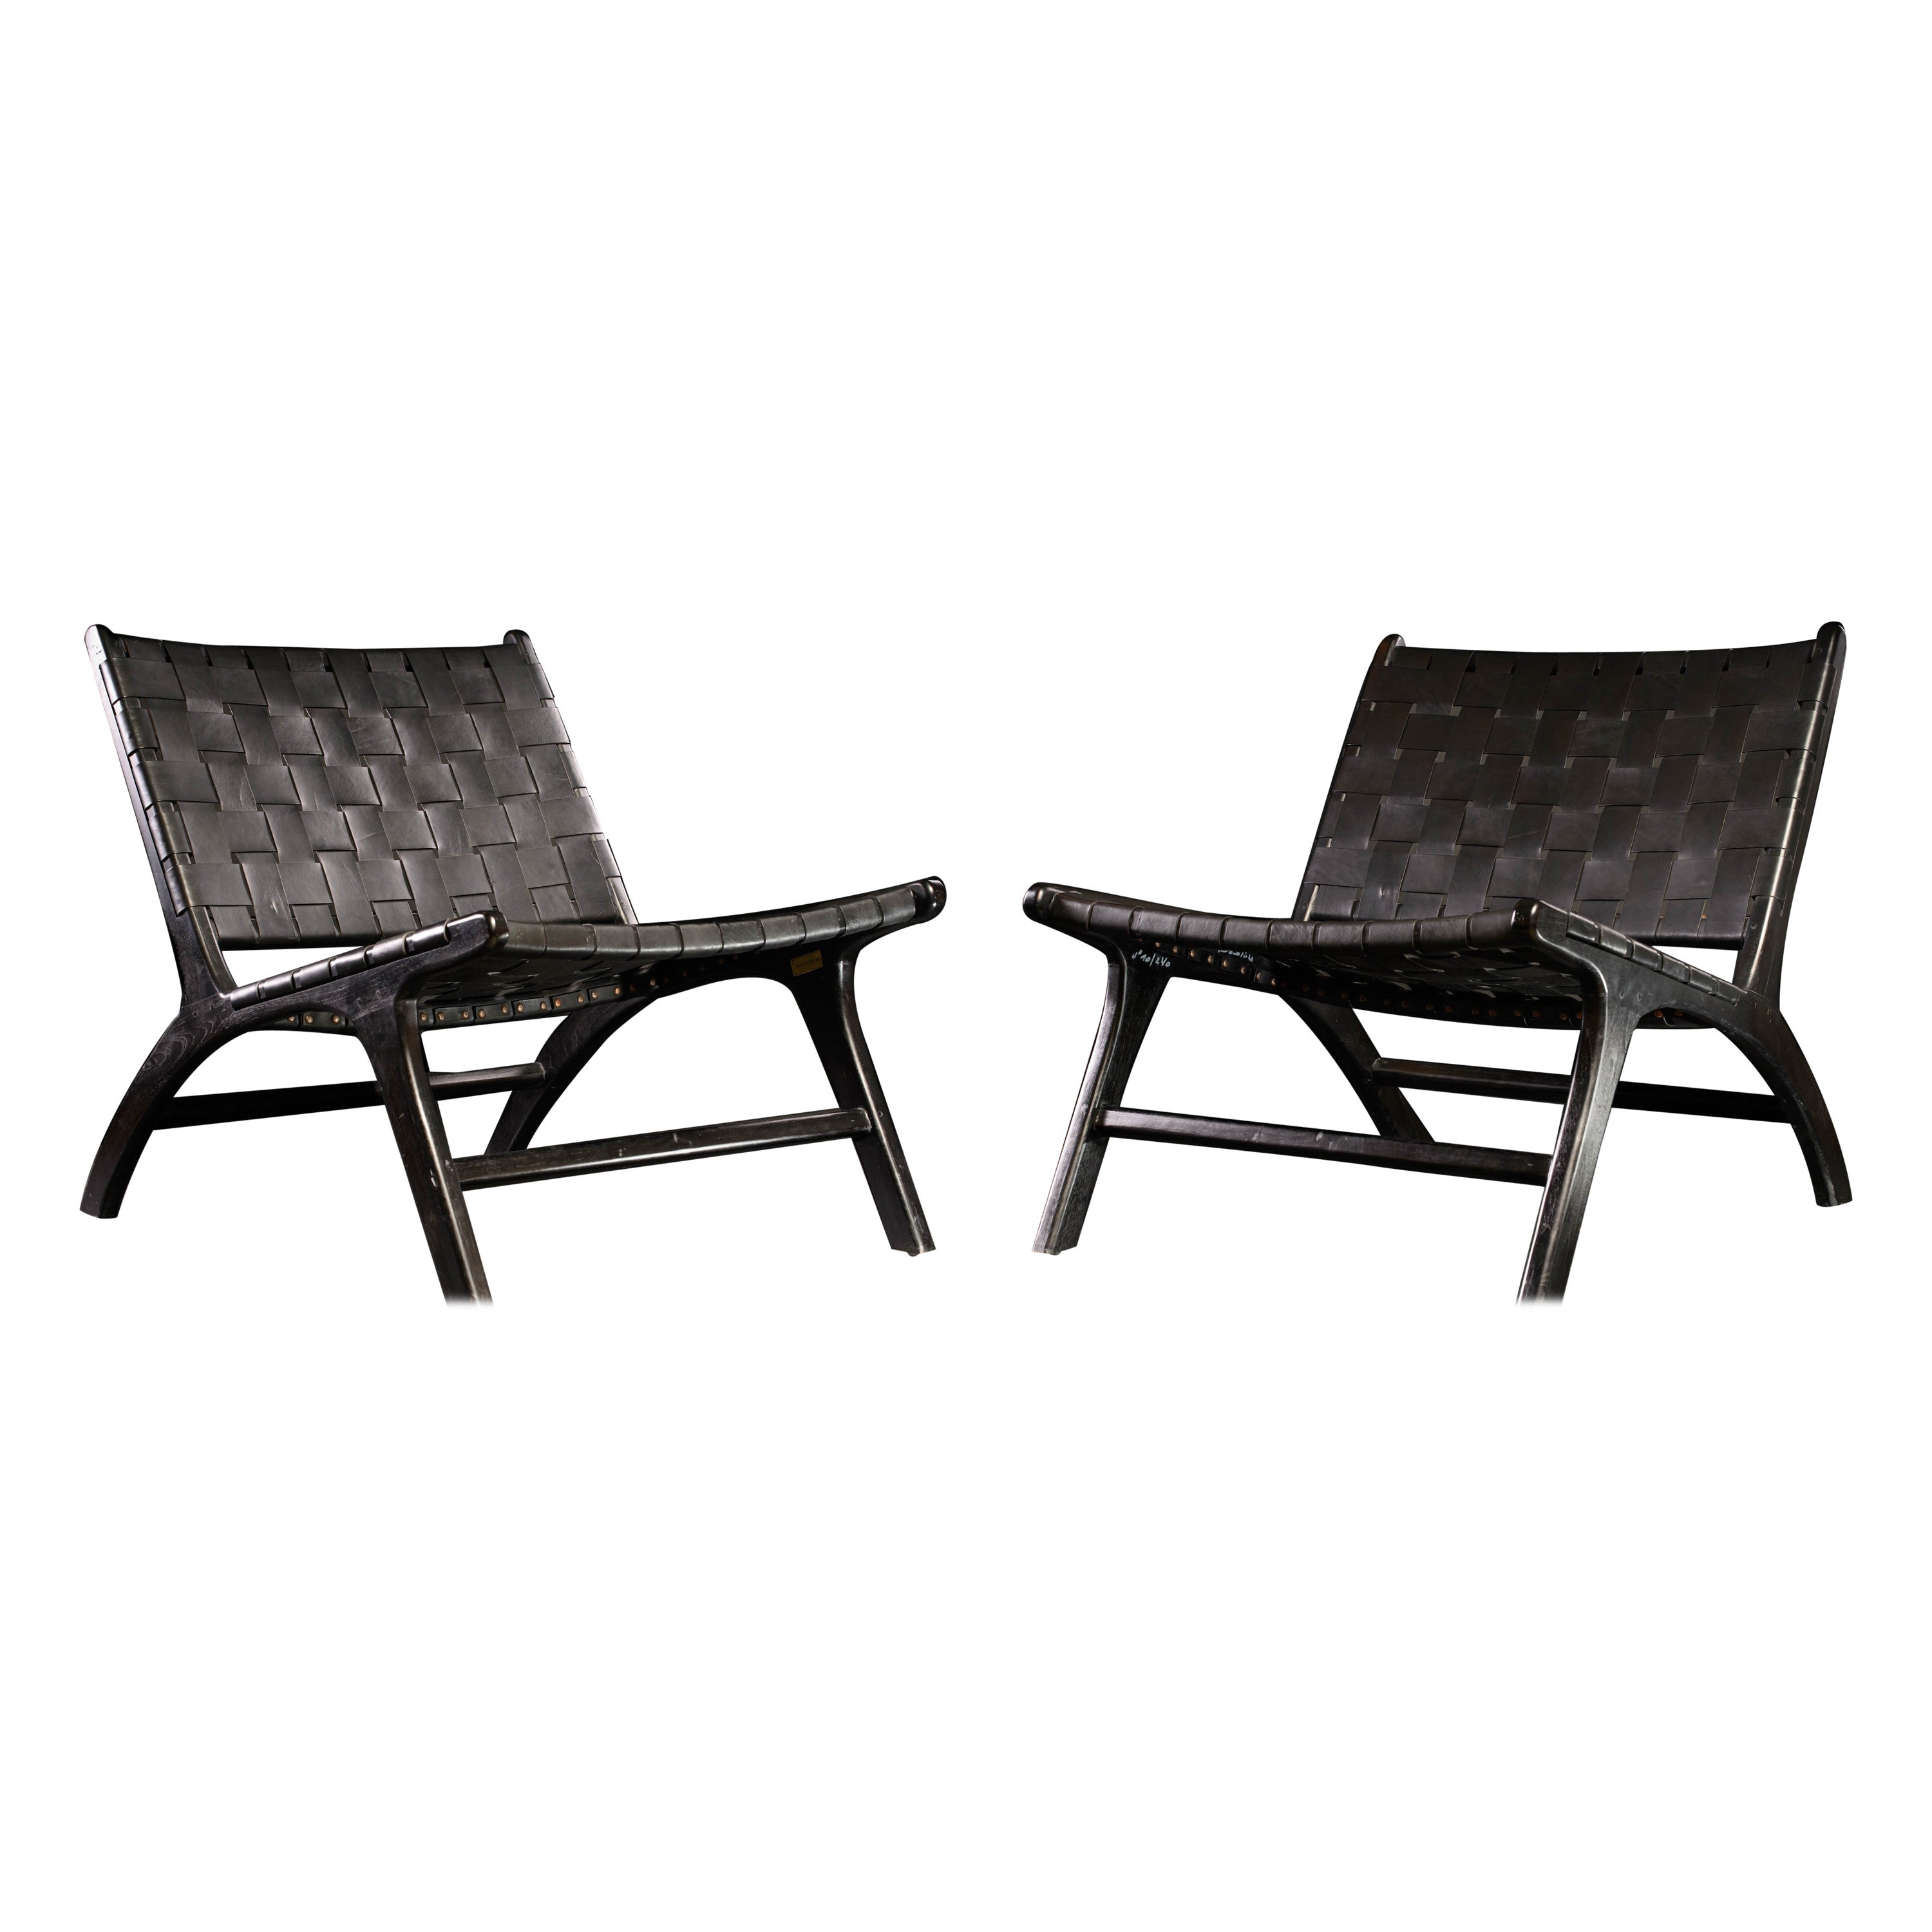 Olivier De Schrijver Ode design edition Pair of Leather woven Lounge chairs